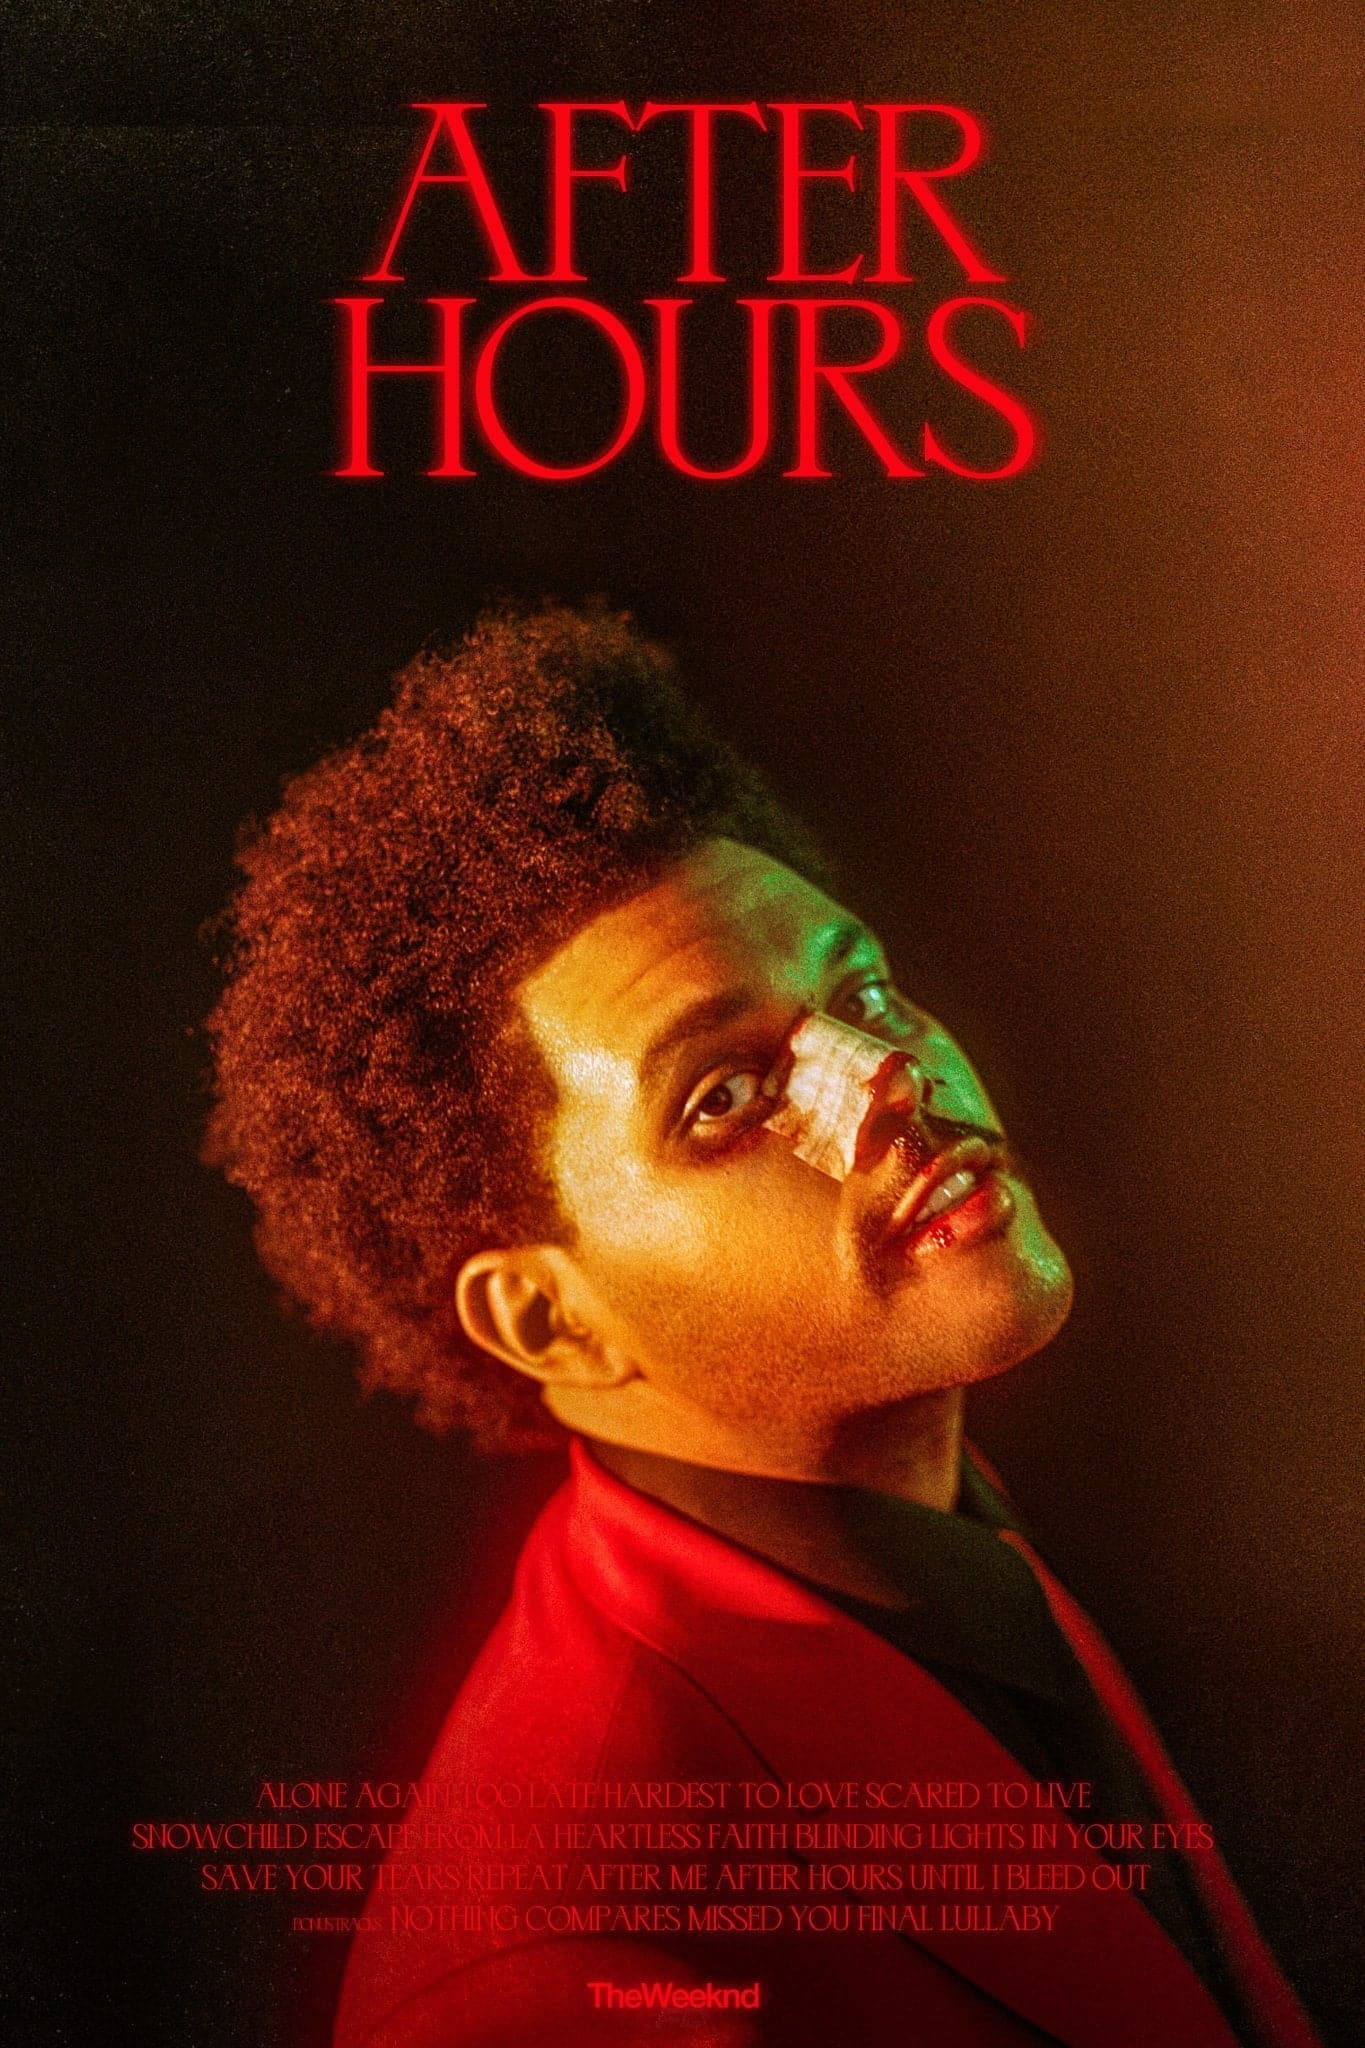 The Weeknd 'After Hours Tracklist' Poster – Posters Plug